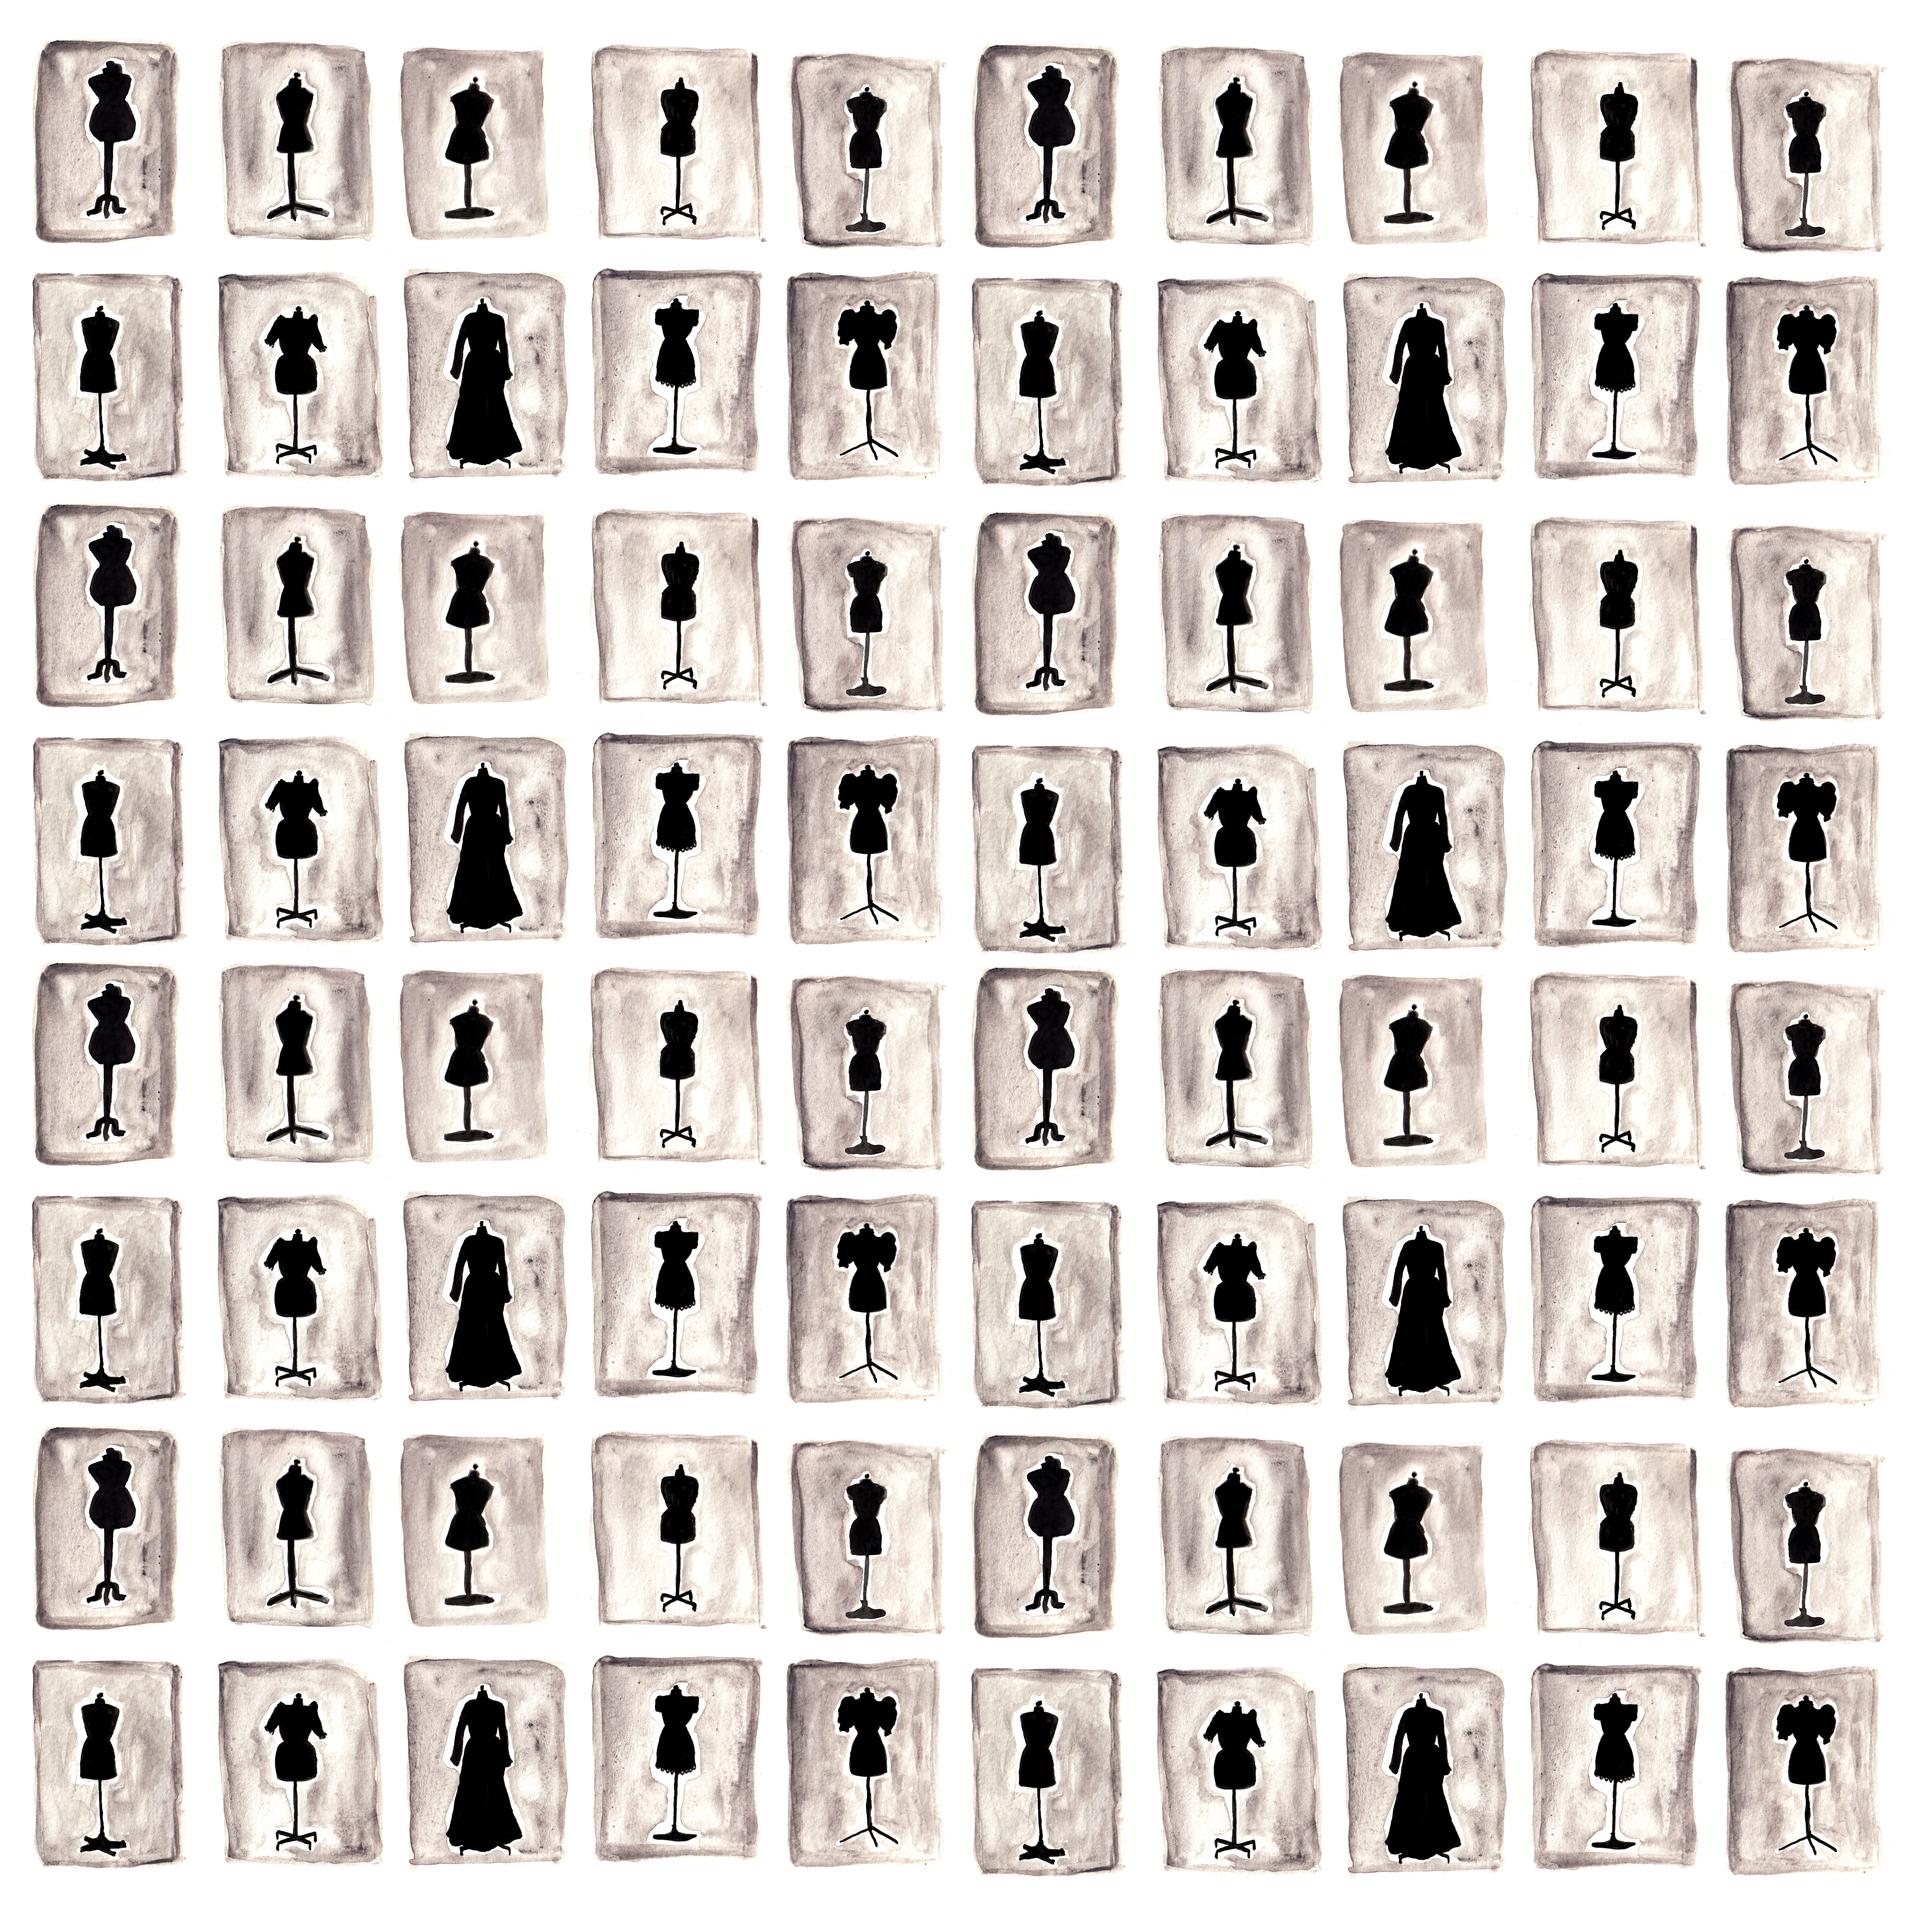 Silhouettes of different kinds of dresses on dress forms in a repeat pattern